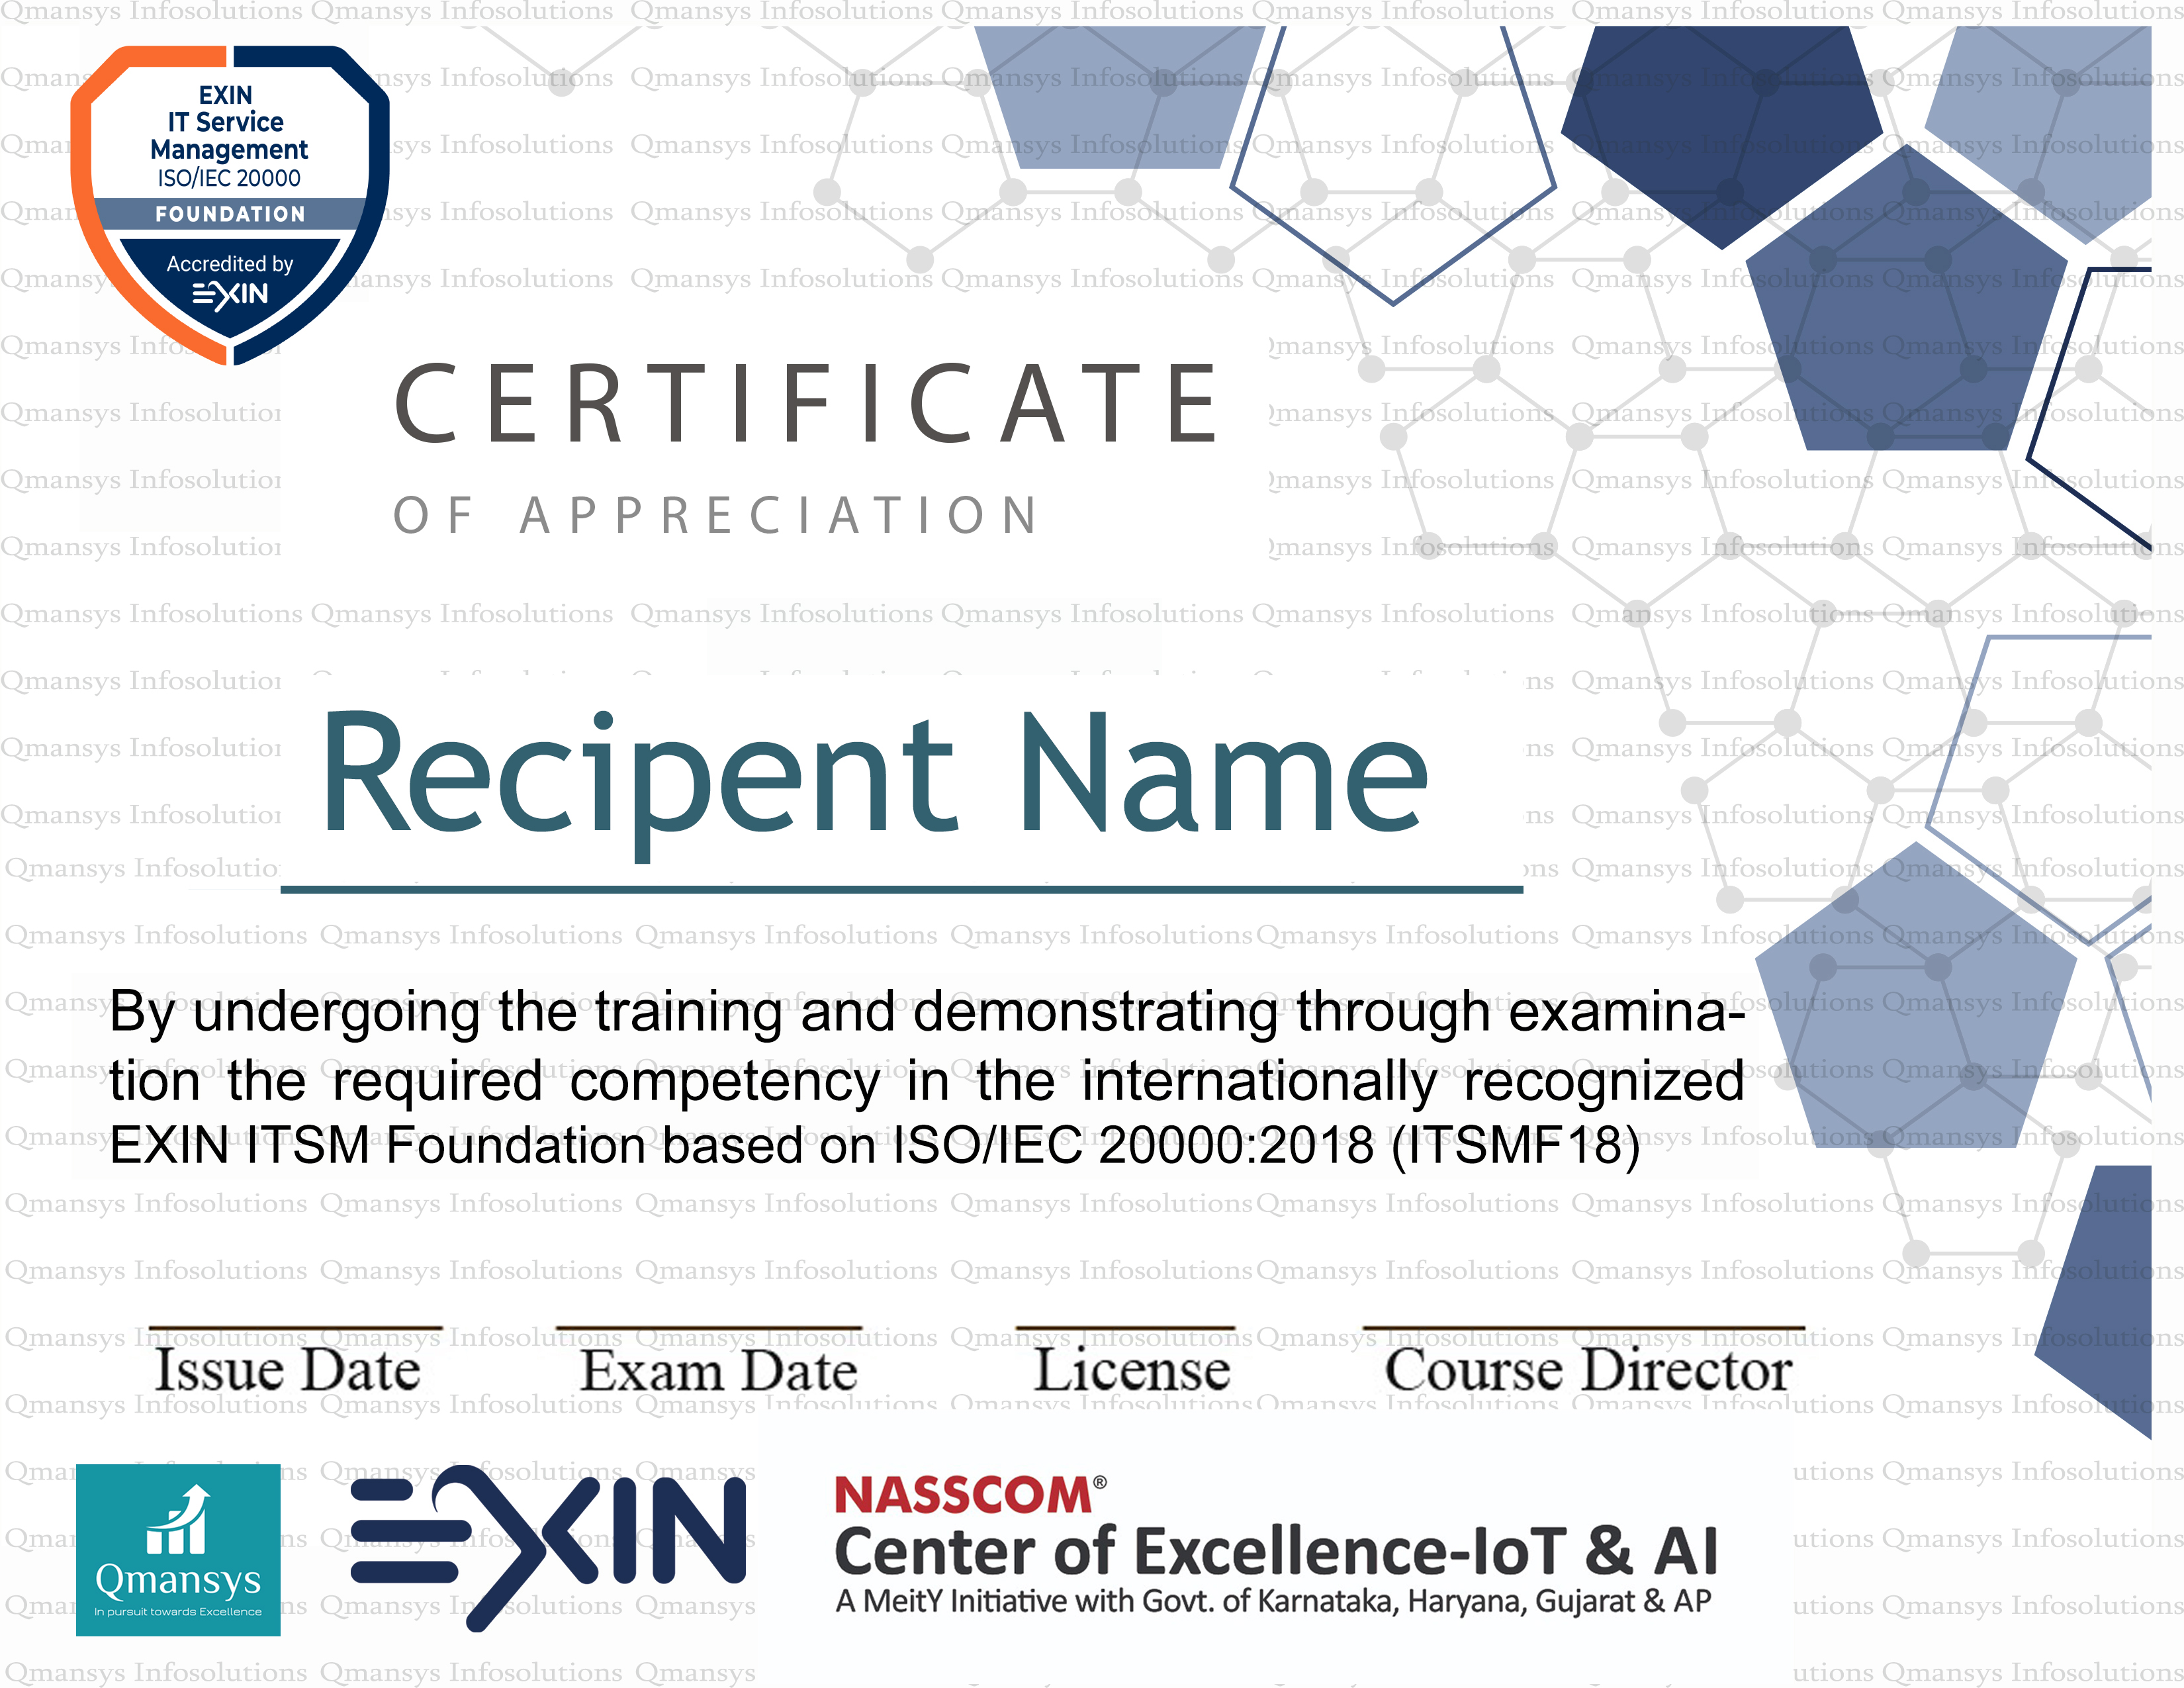 ITSM Foundation based on ISO/IEC 20000:2018 Certificate